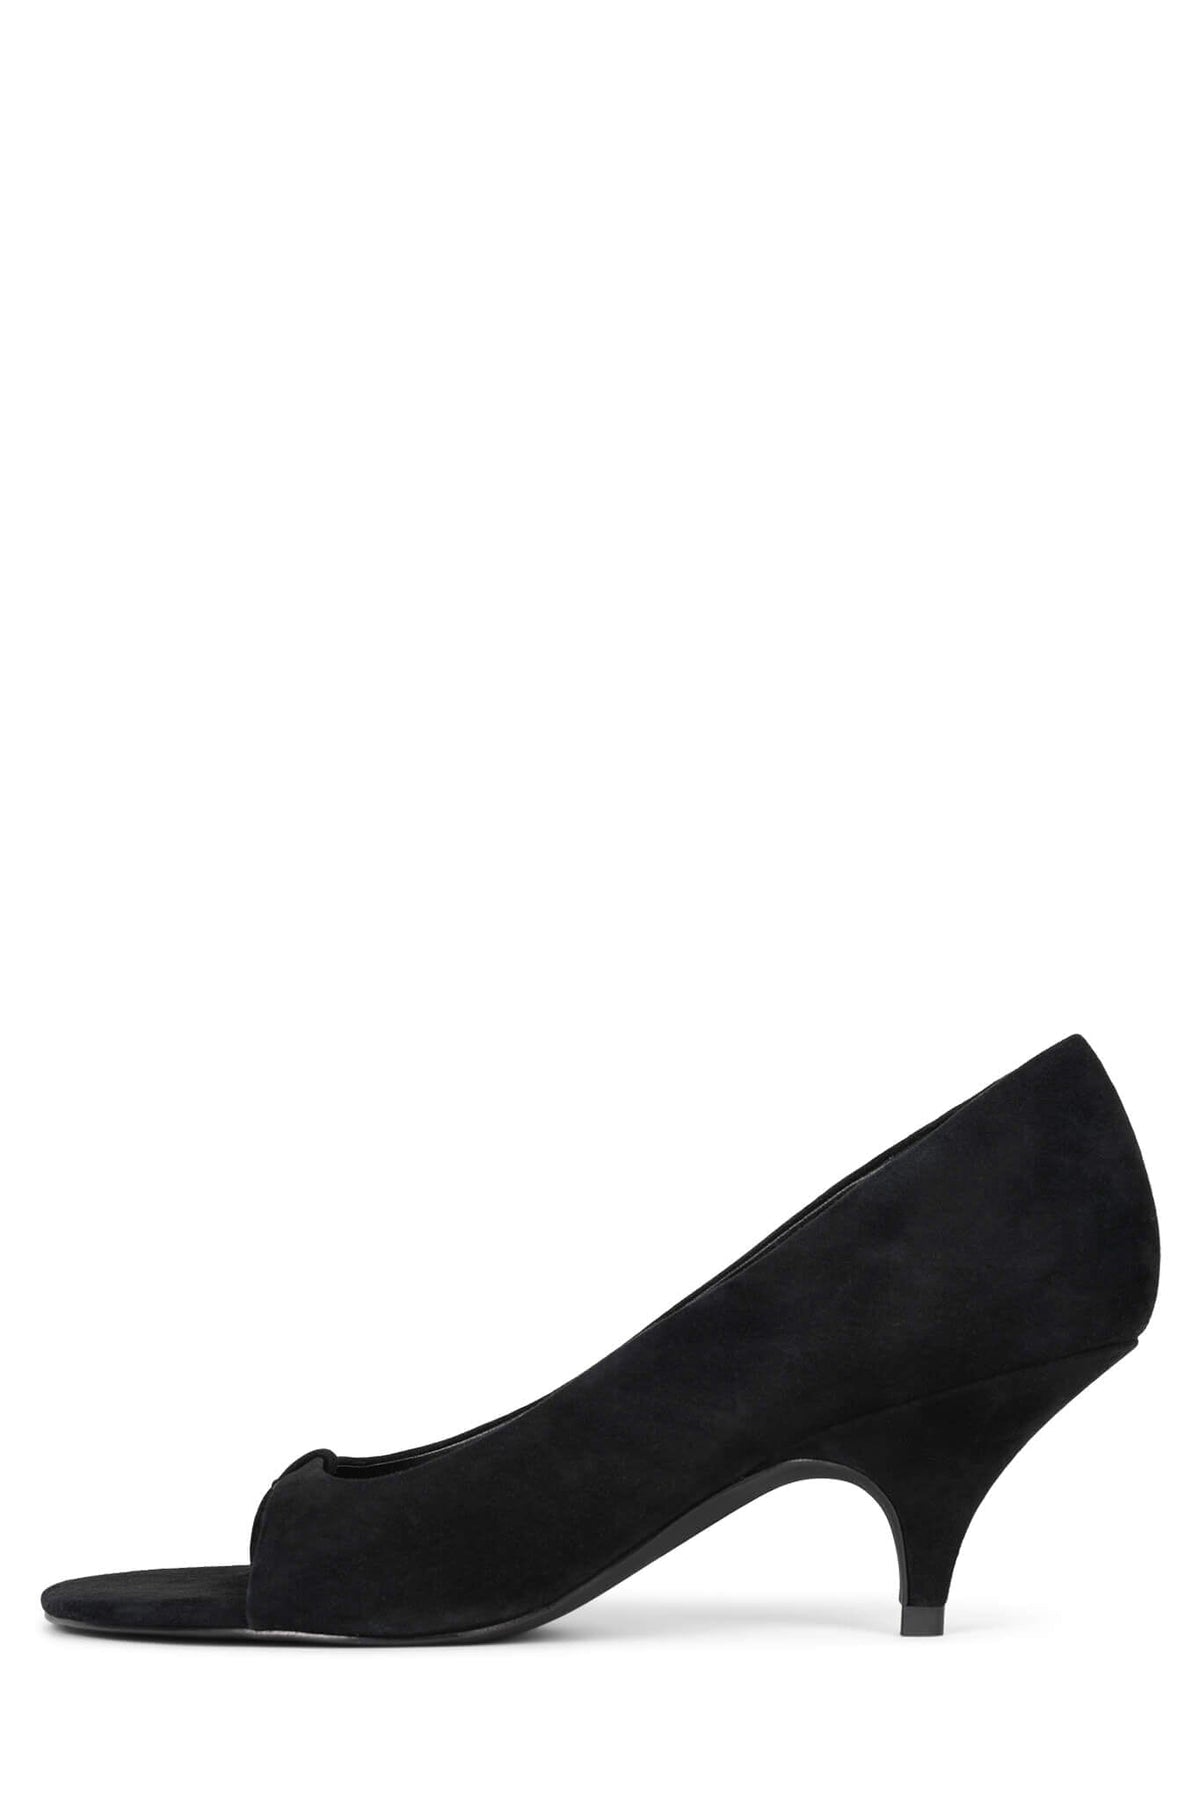 LATE-NIGHT Jeffrey Campbell Pumps Black Suede